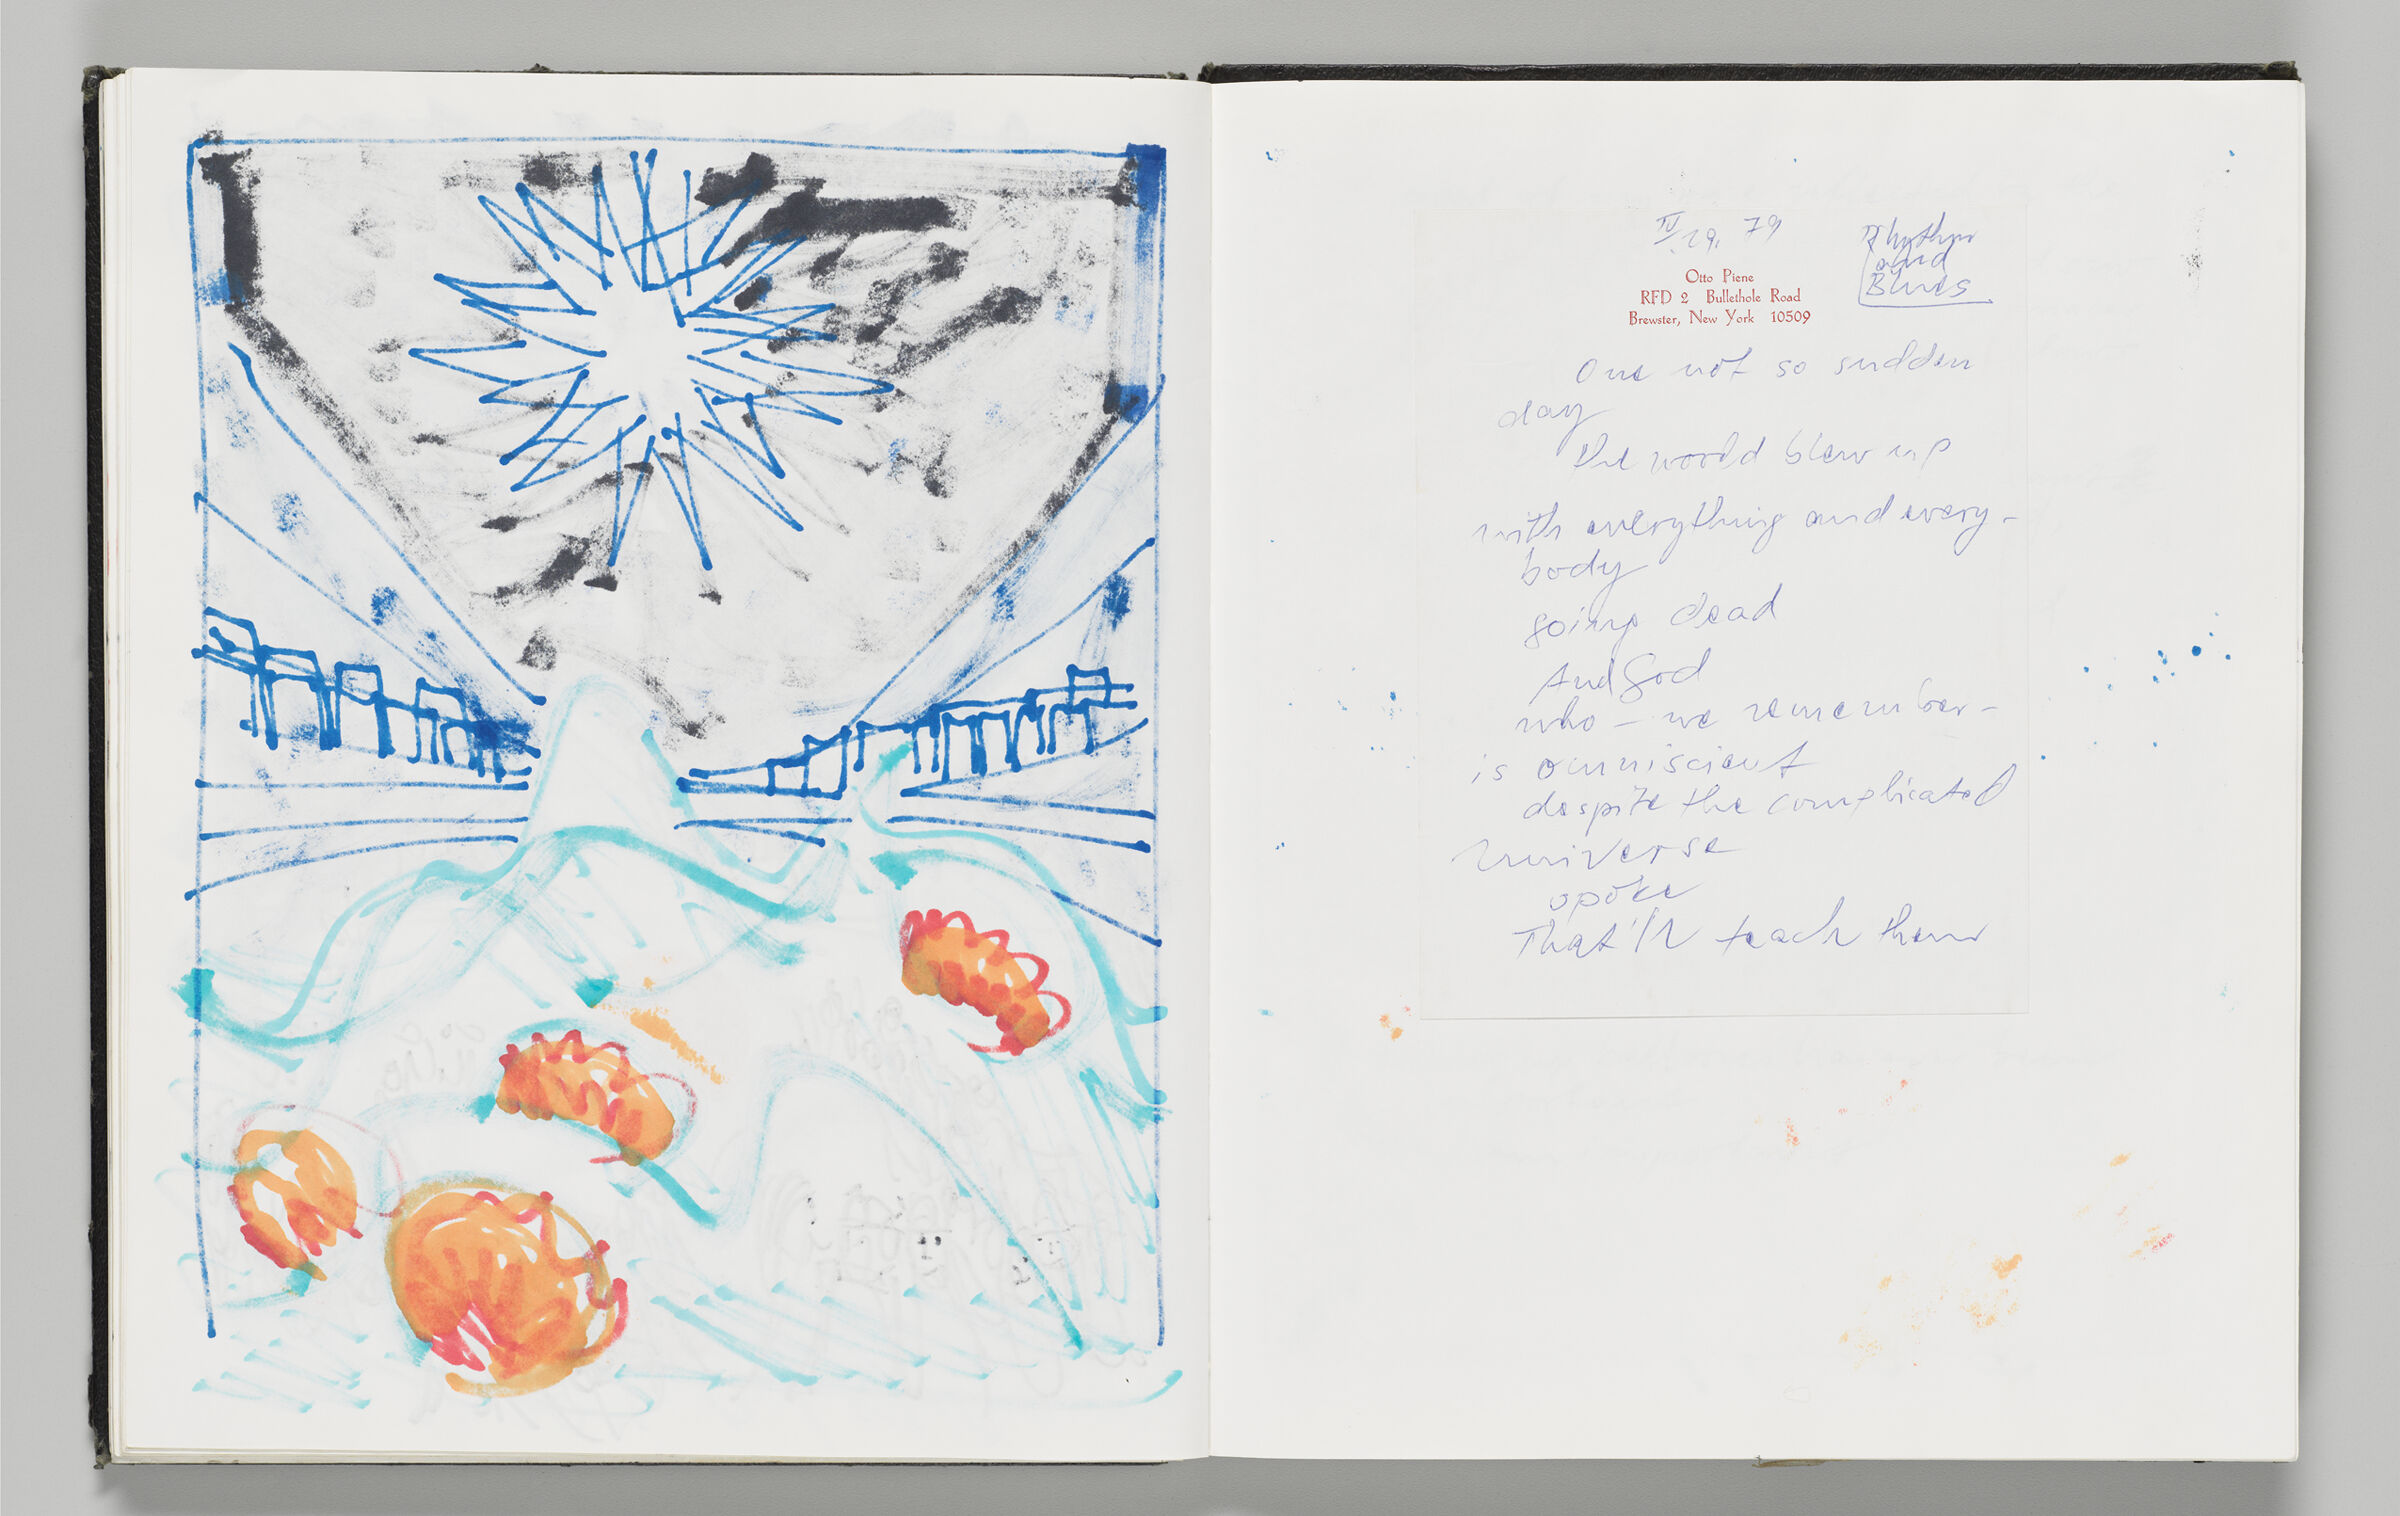 Untitled (Bleed-Through Of Previous Page, Left Page); Untitled (Adhered Poem On Notepaper, Right Page)